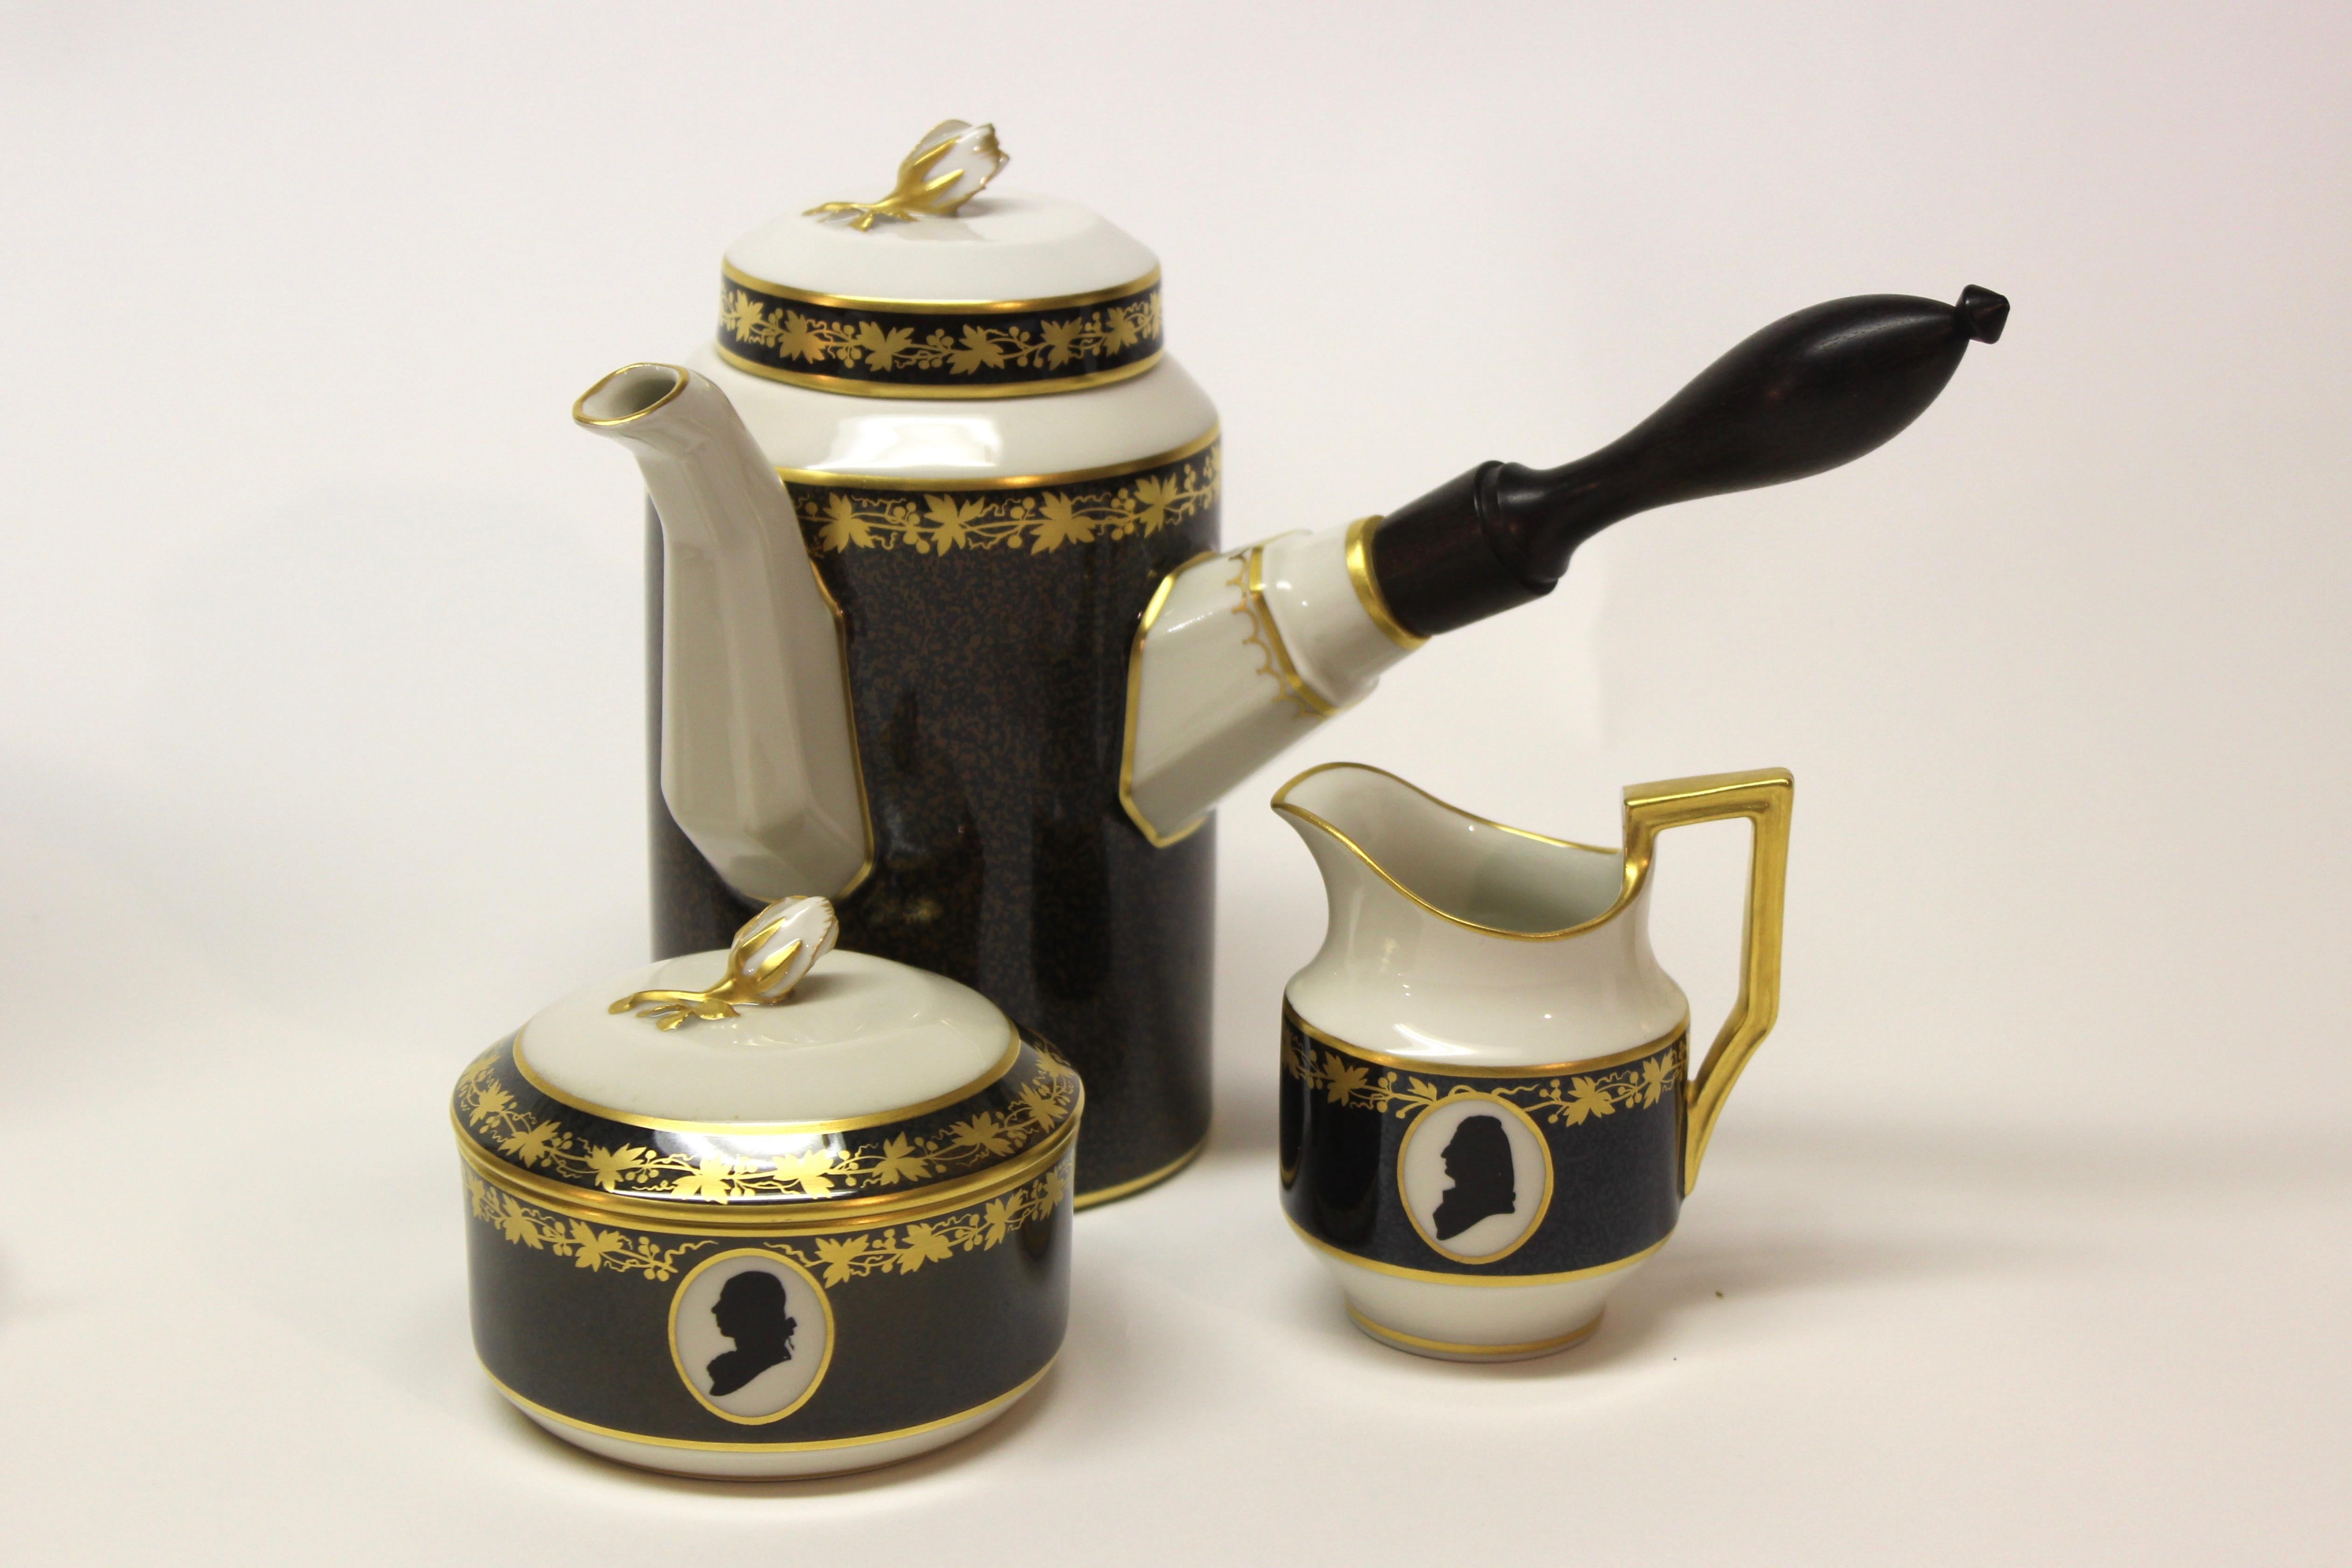 Rare American Presidents colonial coffee service made by Royal Copenhagen In 1976, Limited to 300...

It consists of four coffee cups and saucers, creamer, sugar bowl, coffee pot and charger.

Presidents depicted are as follows: 
Coffee cups: